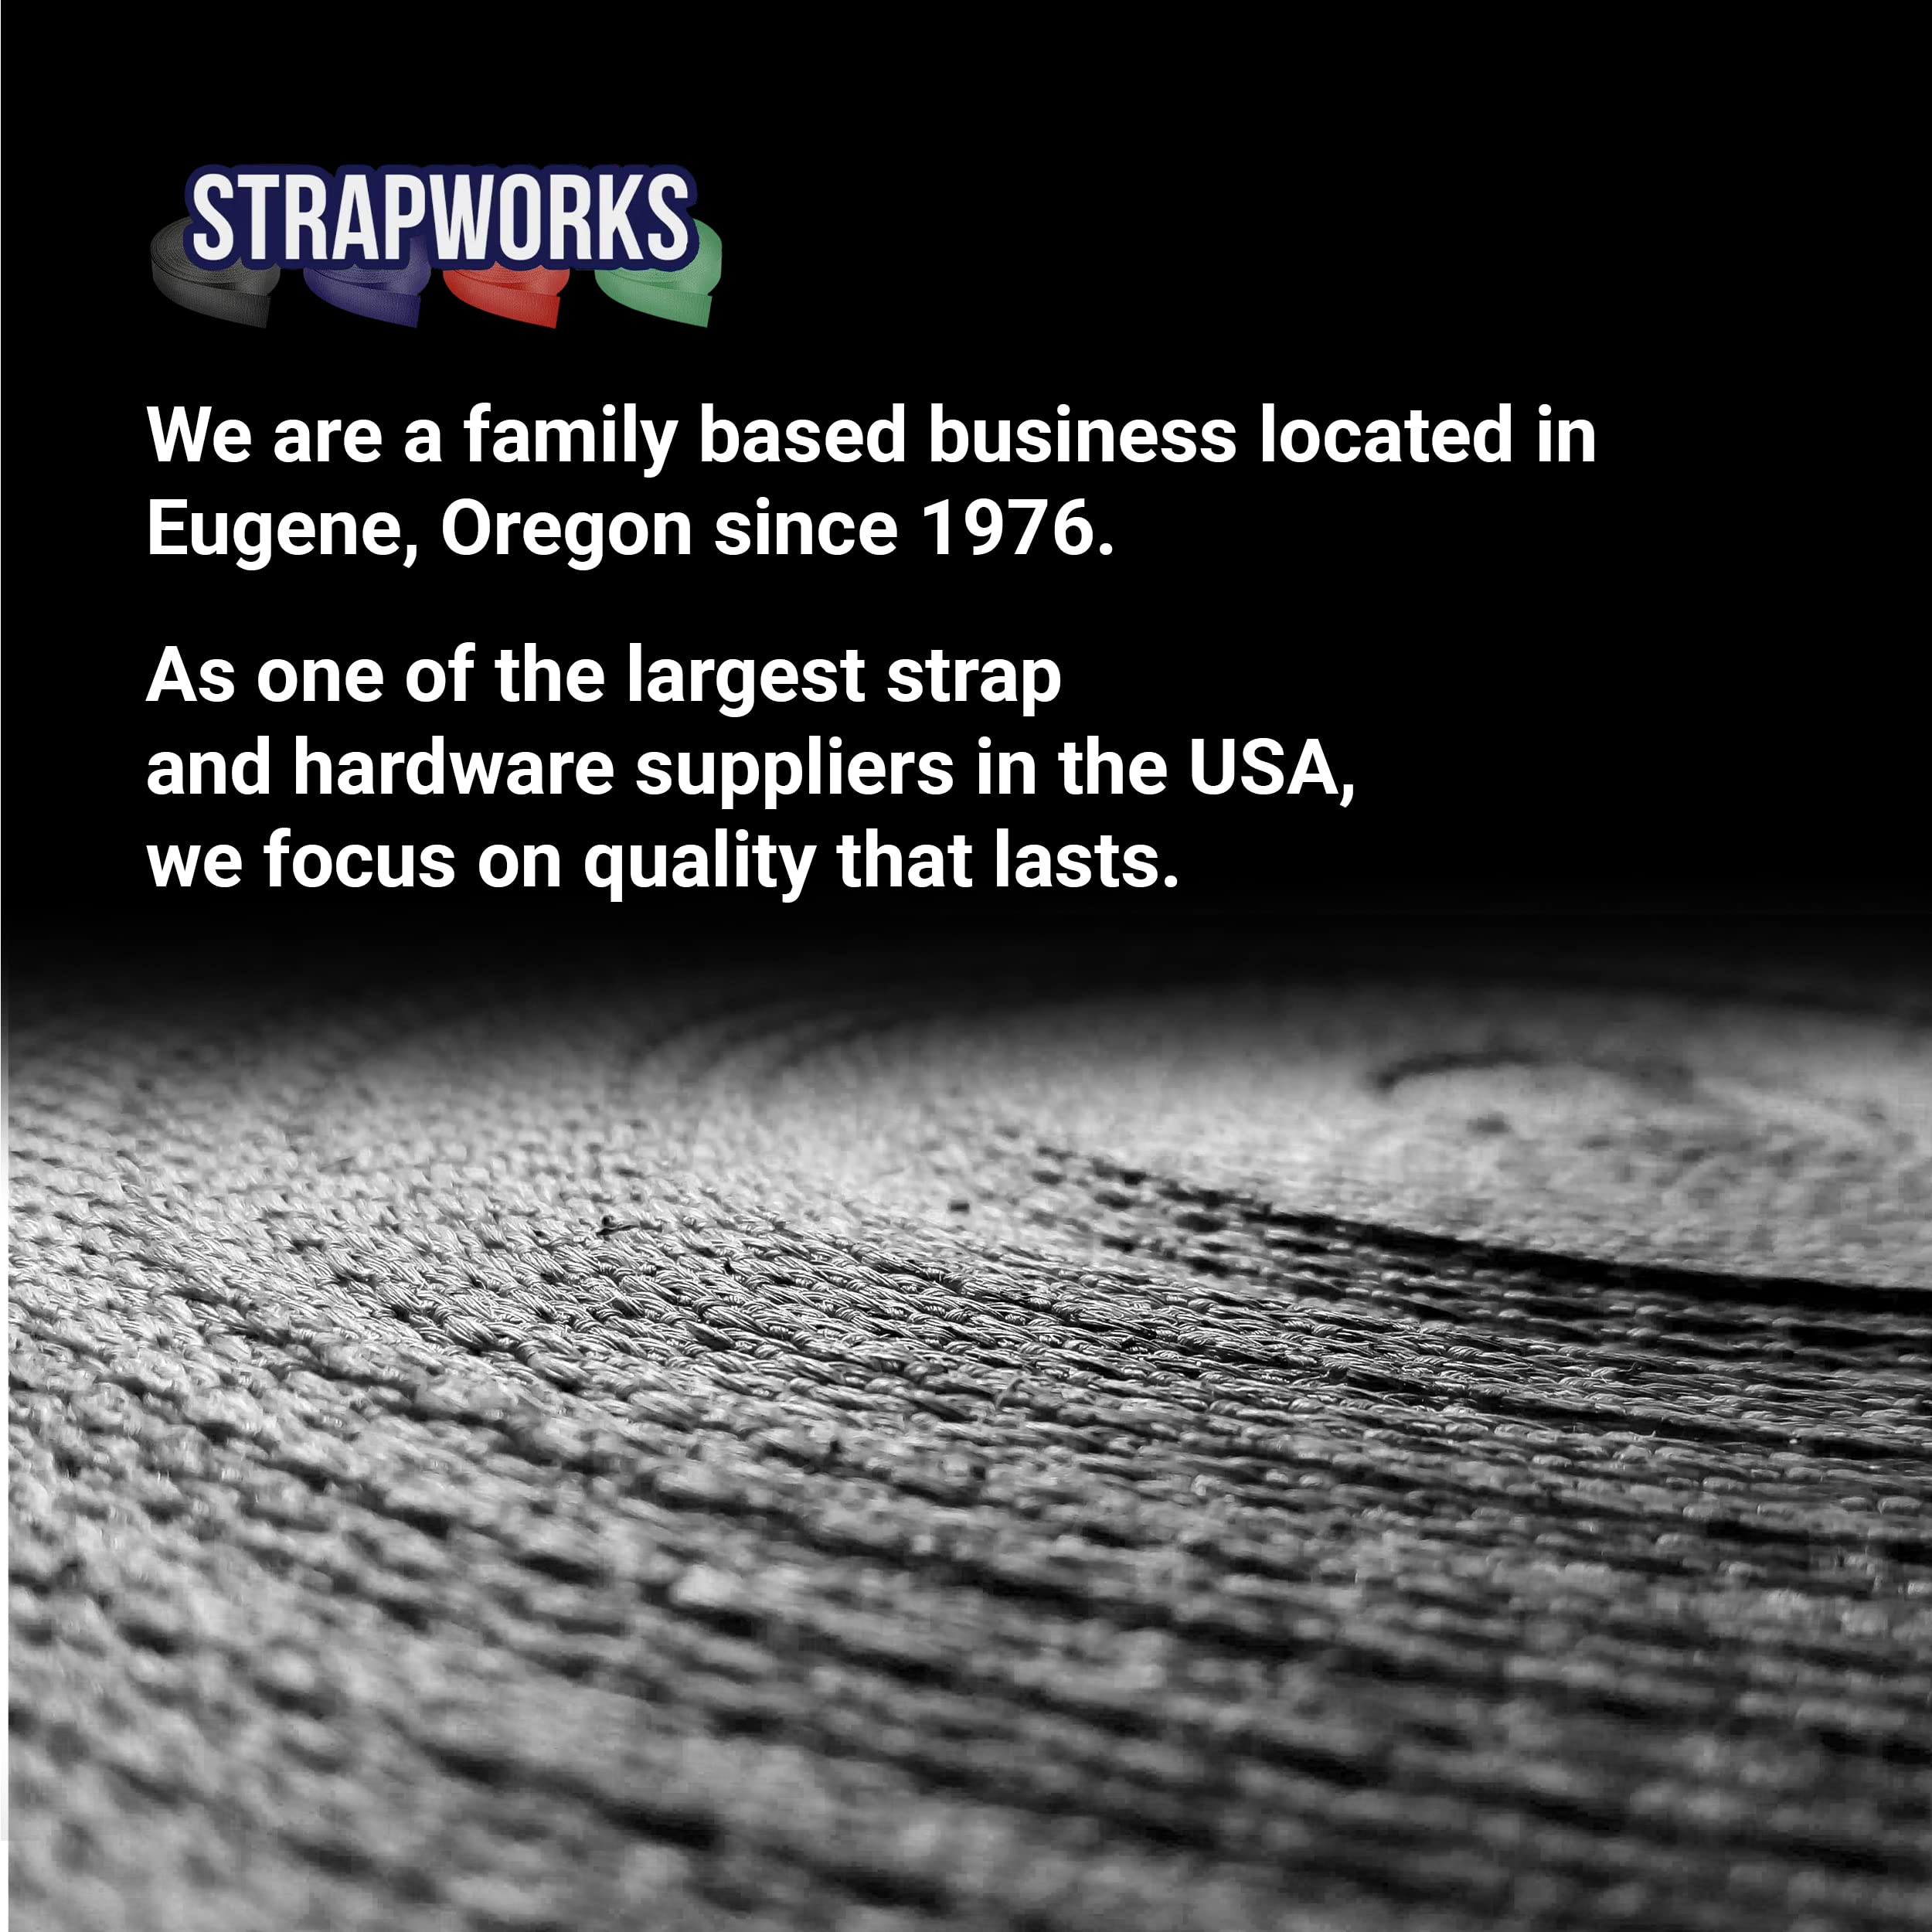 Strapworks Heavyweight Polypropylene Webbing - Heavy Duty Poly Strapping for Outdoor DIY Gear Repair, 3/4 Inch